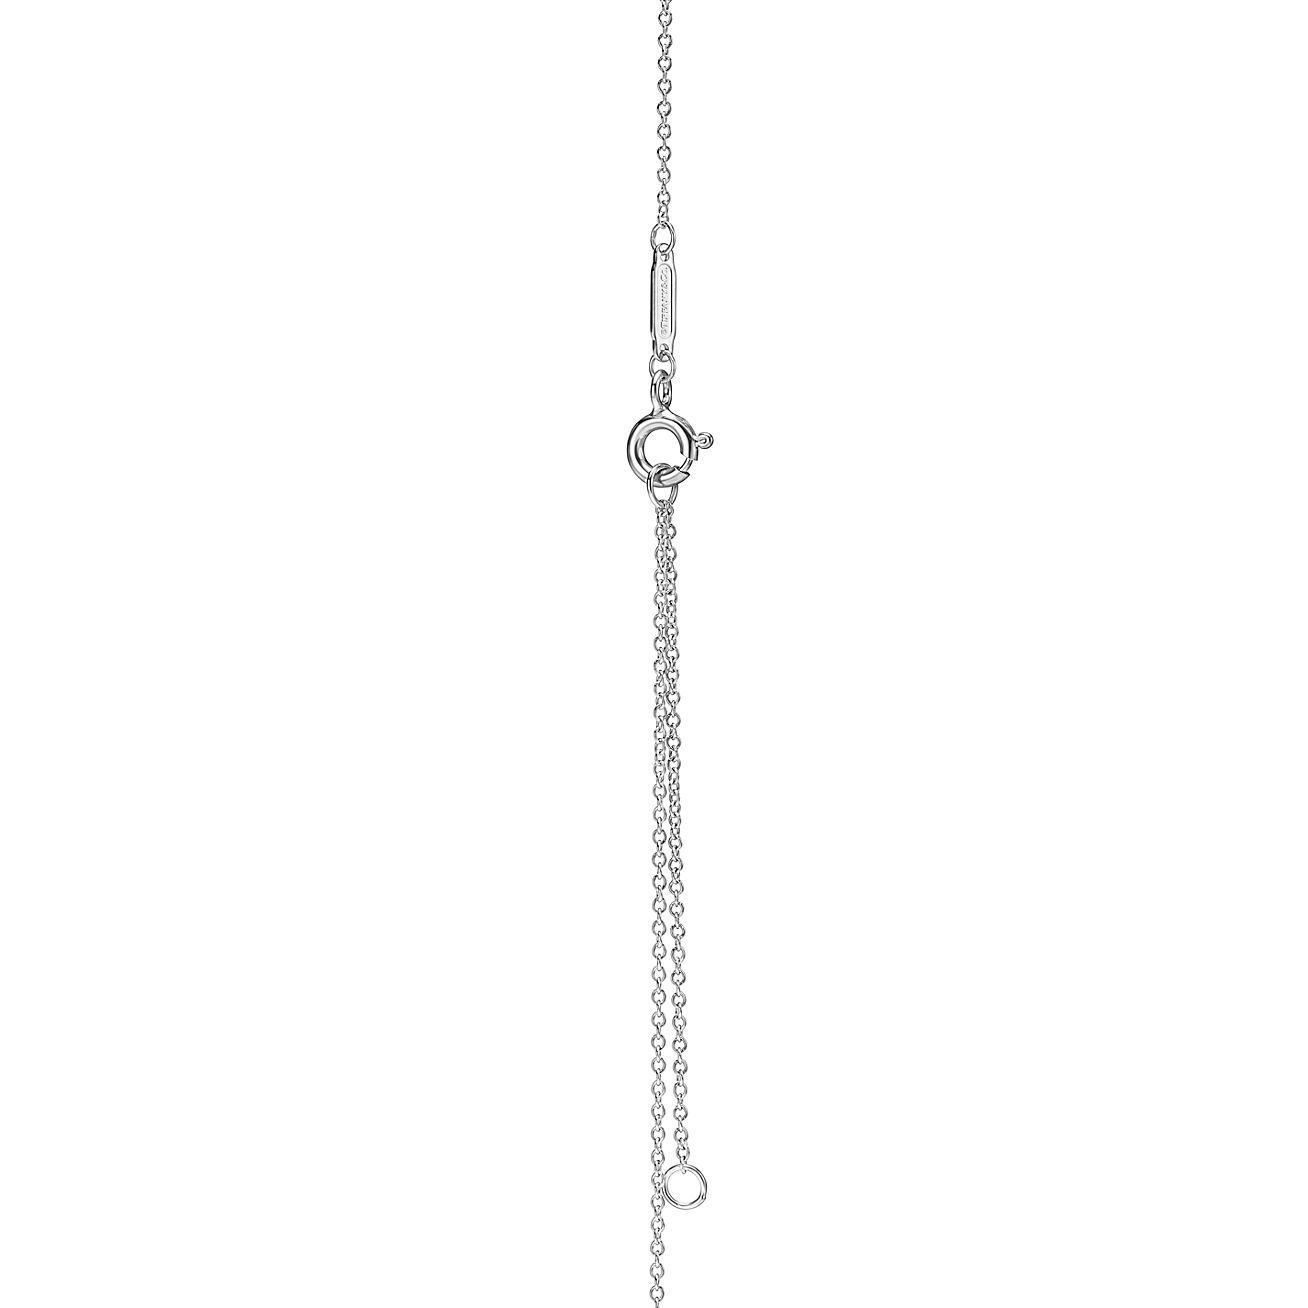 Return to Tiffany™ Heart Pendant in Silver, Tiffany Blue™ with a 